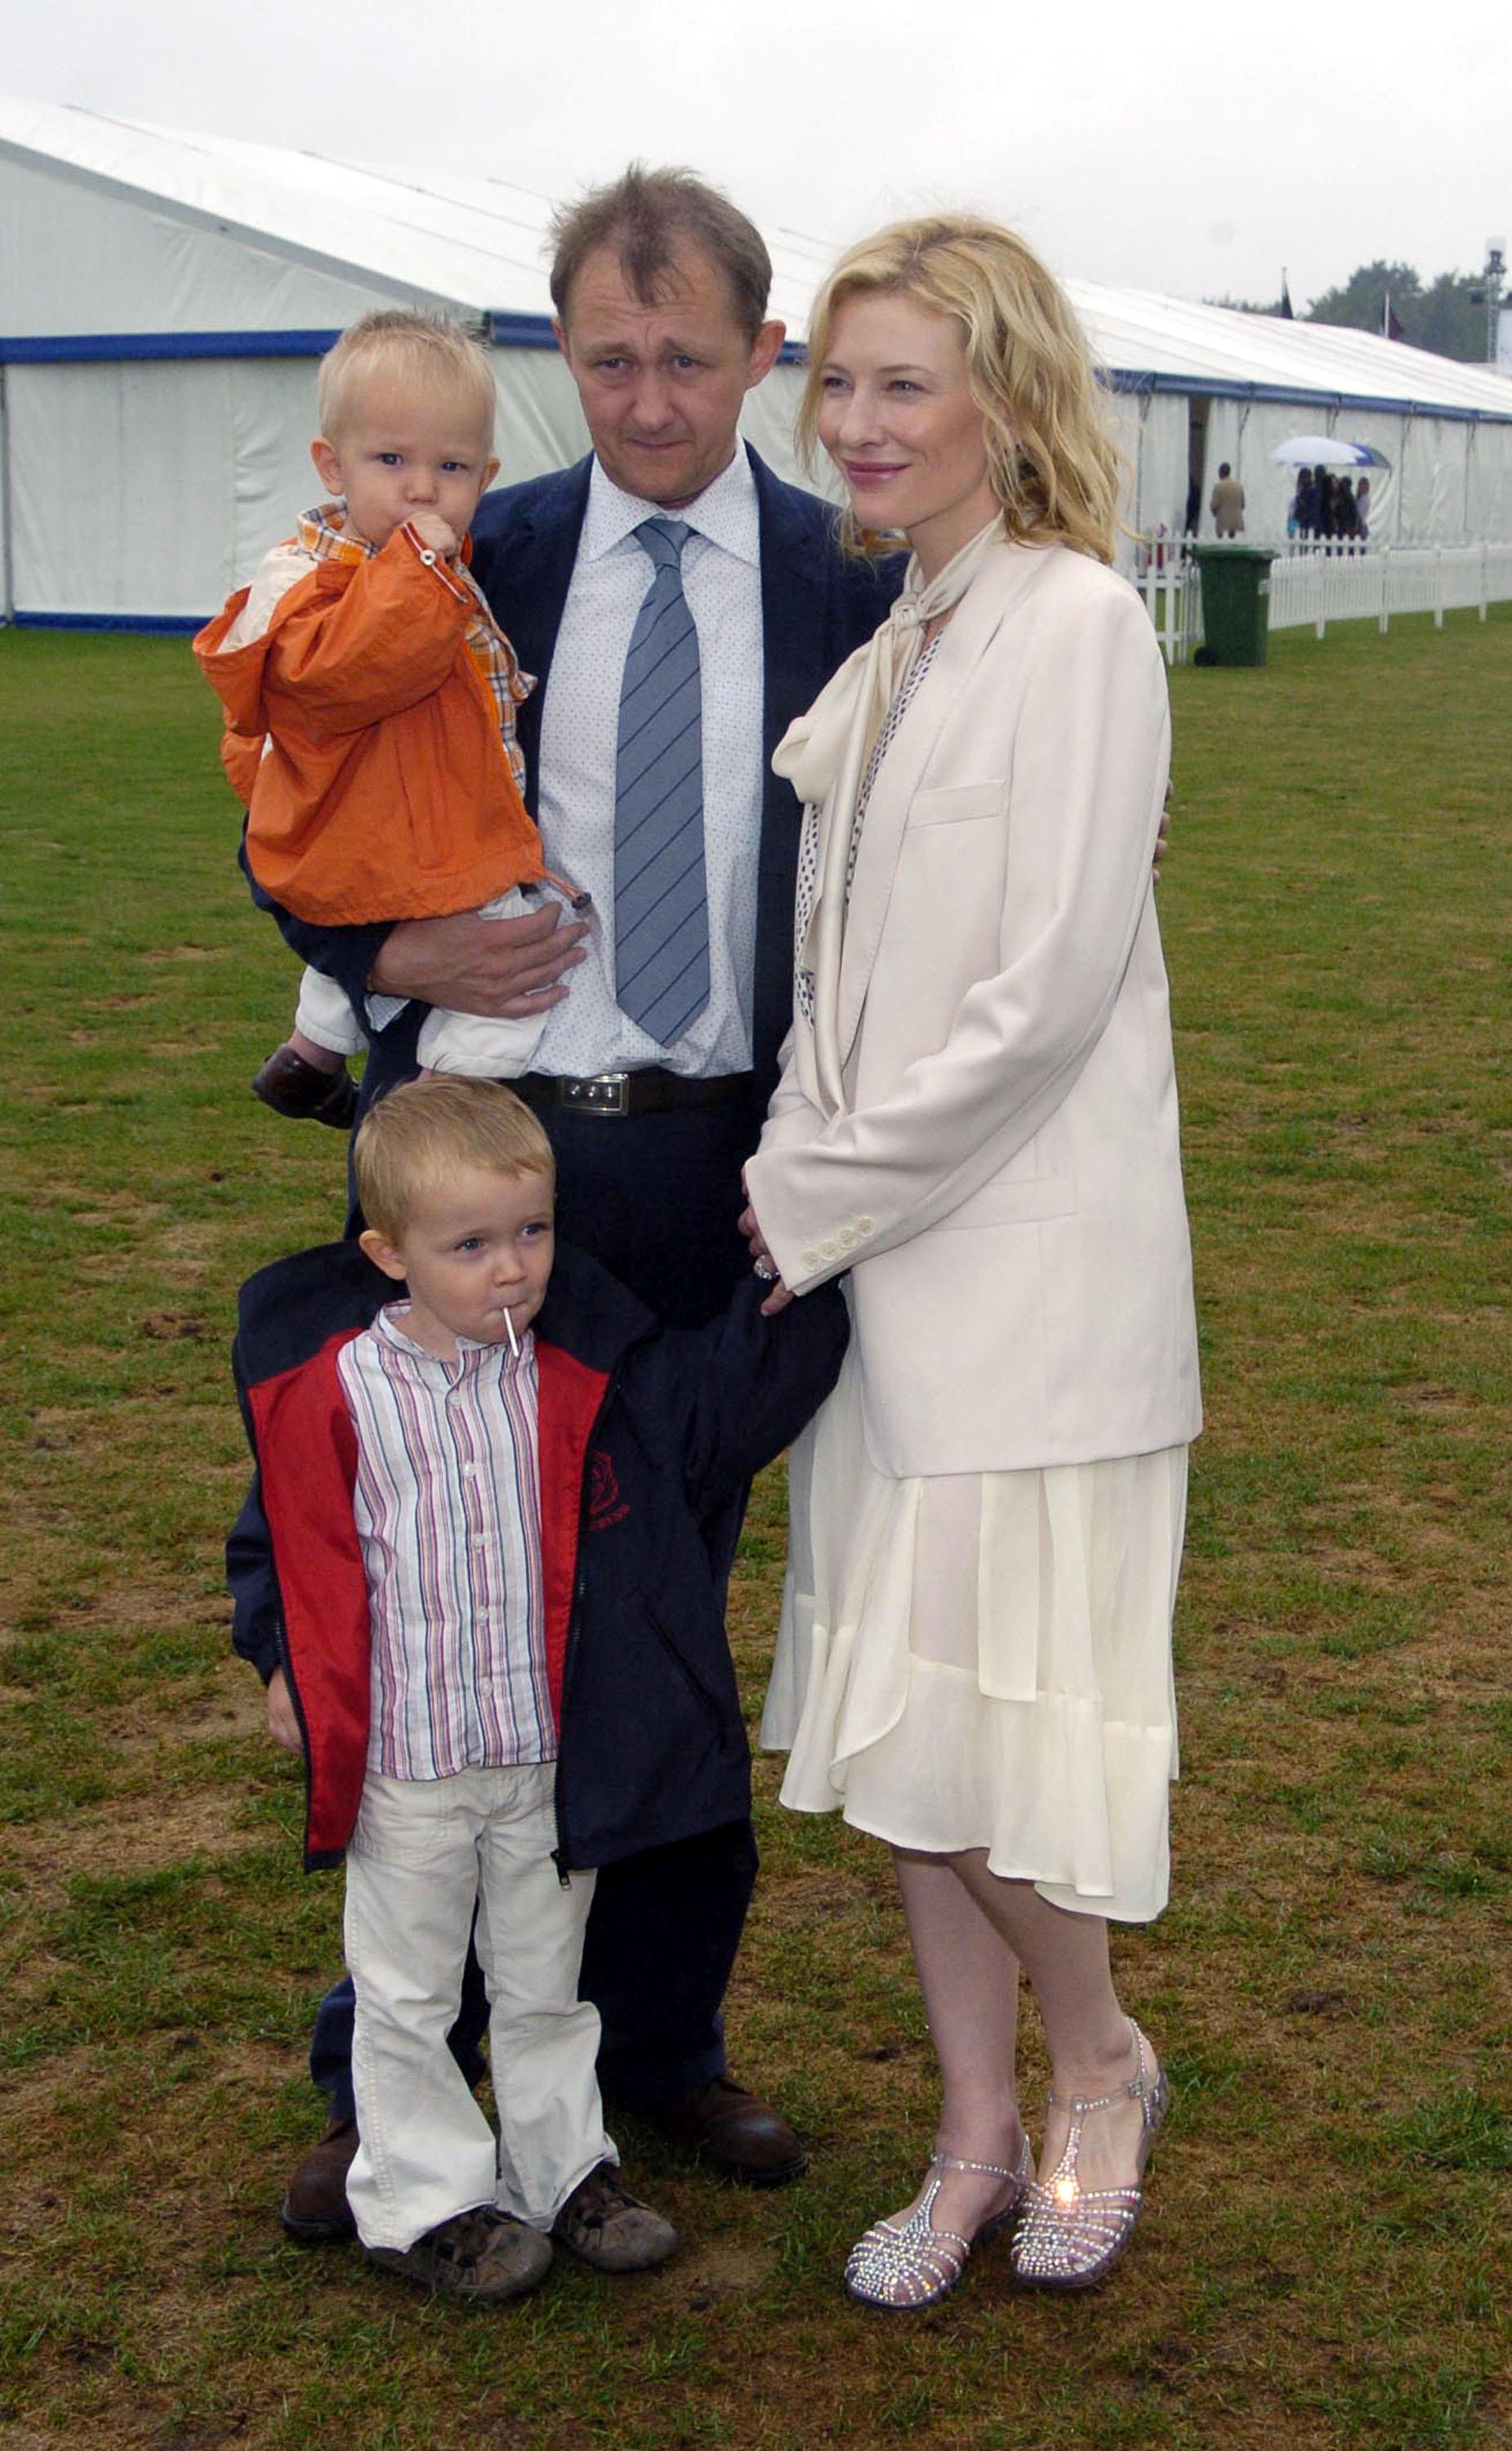 Cate Blanchett, her husband Andrew Upton, and two of her three sons, Roman and Dashiell, at Cartier Polo Day on July 24, 2005. | Source: Getty Images